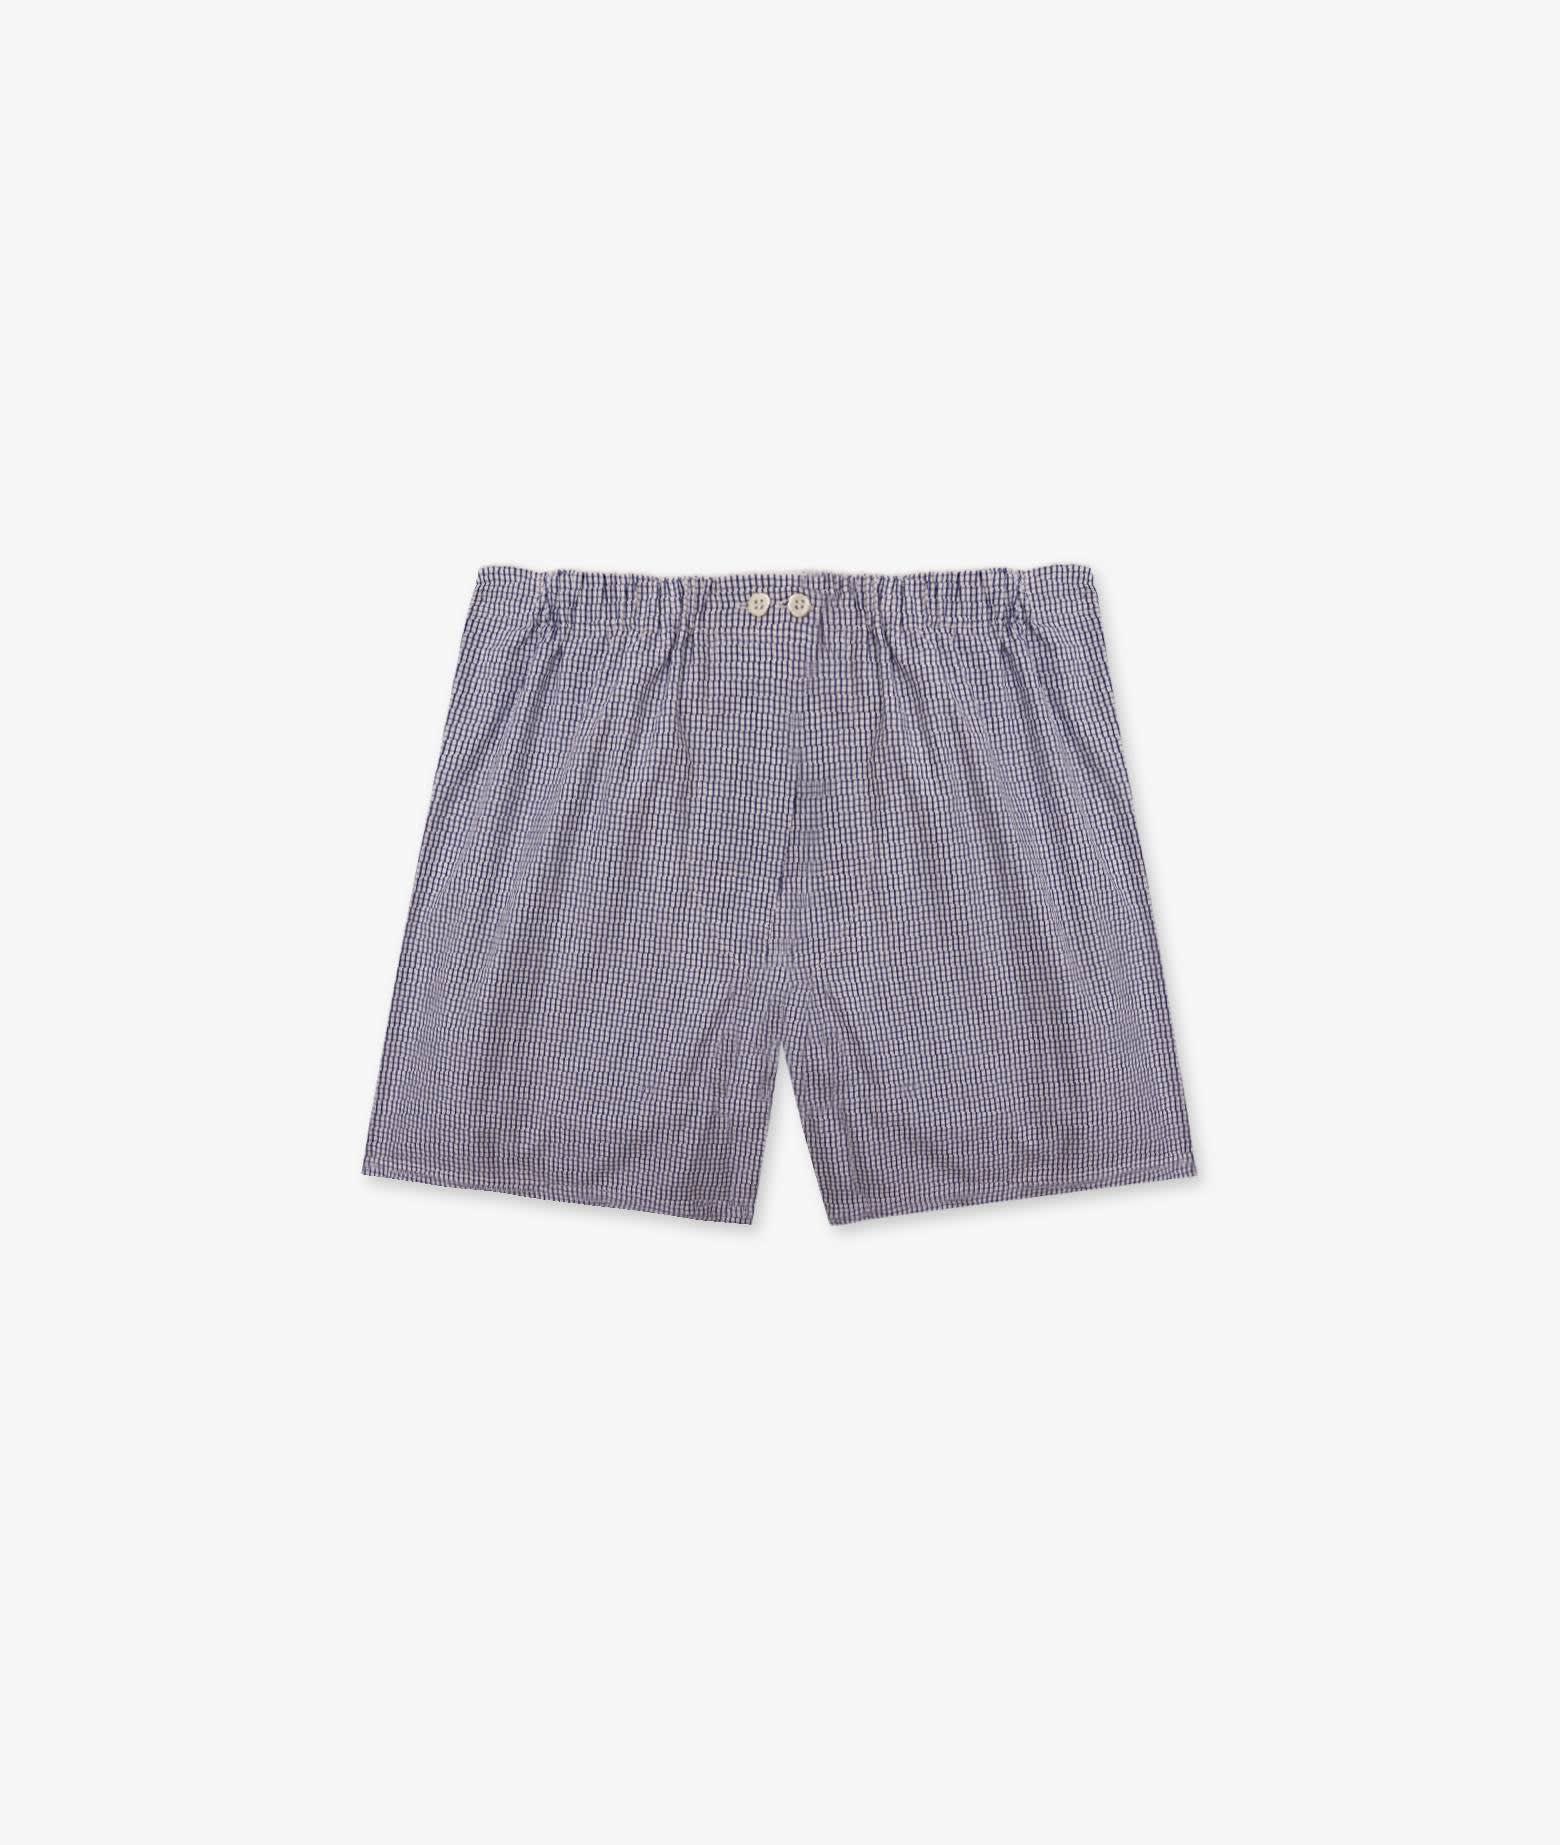 Cotton Boxershorts Knickers